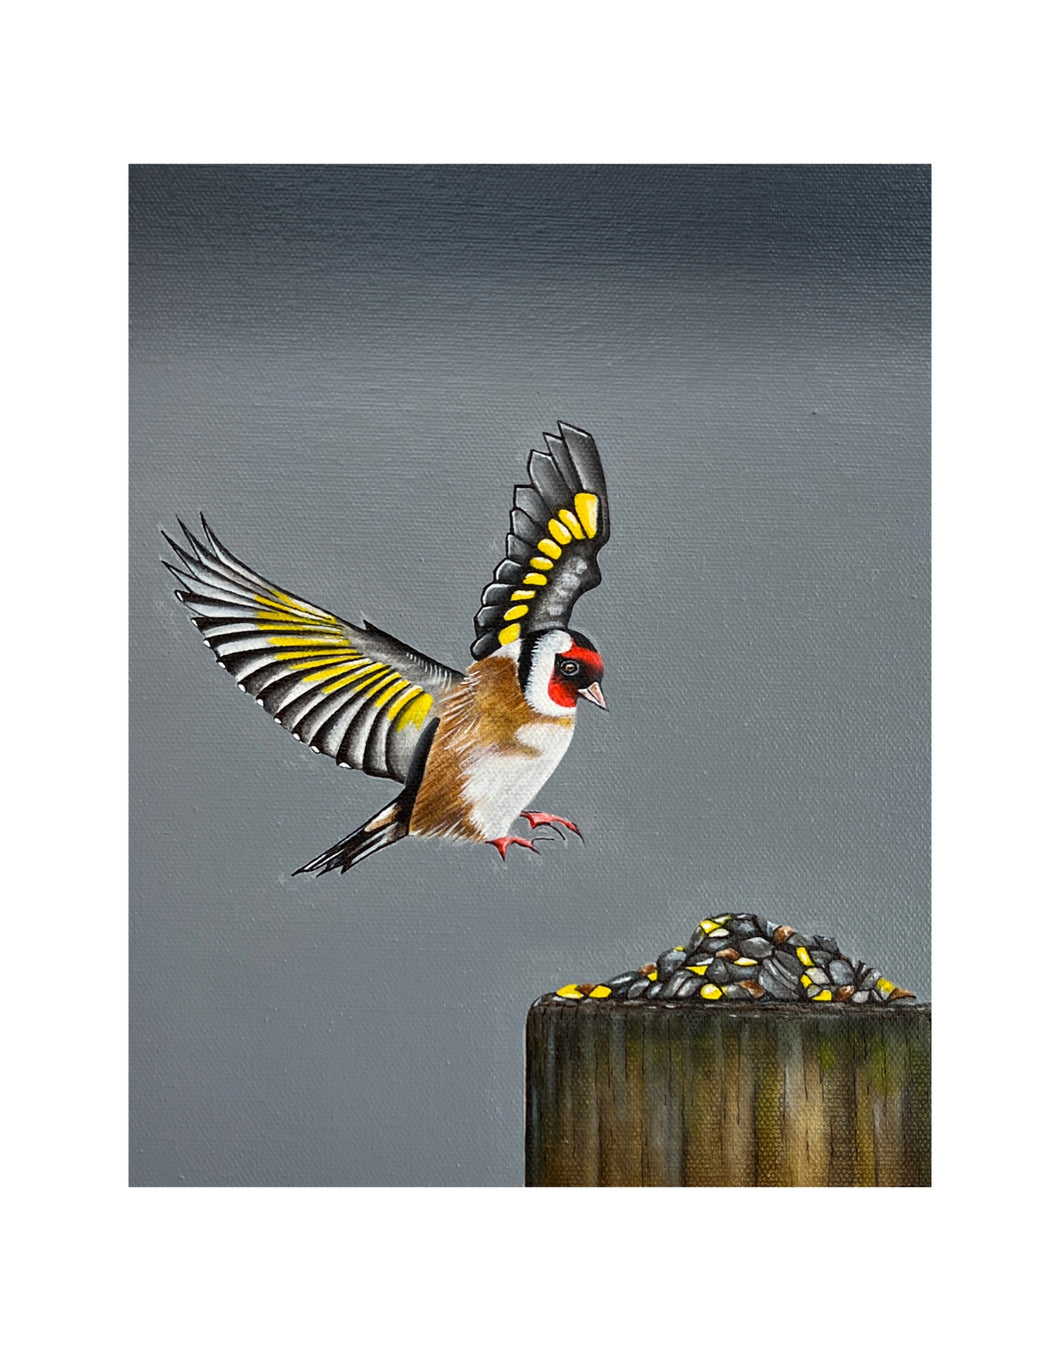 Goldfinch: A feast of seeds